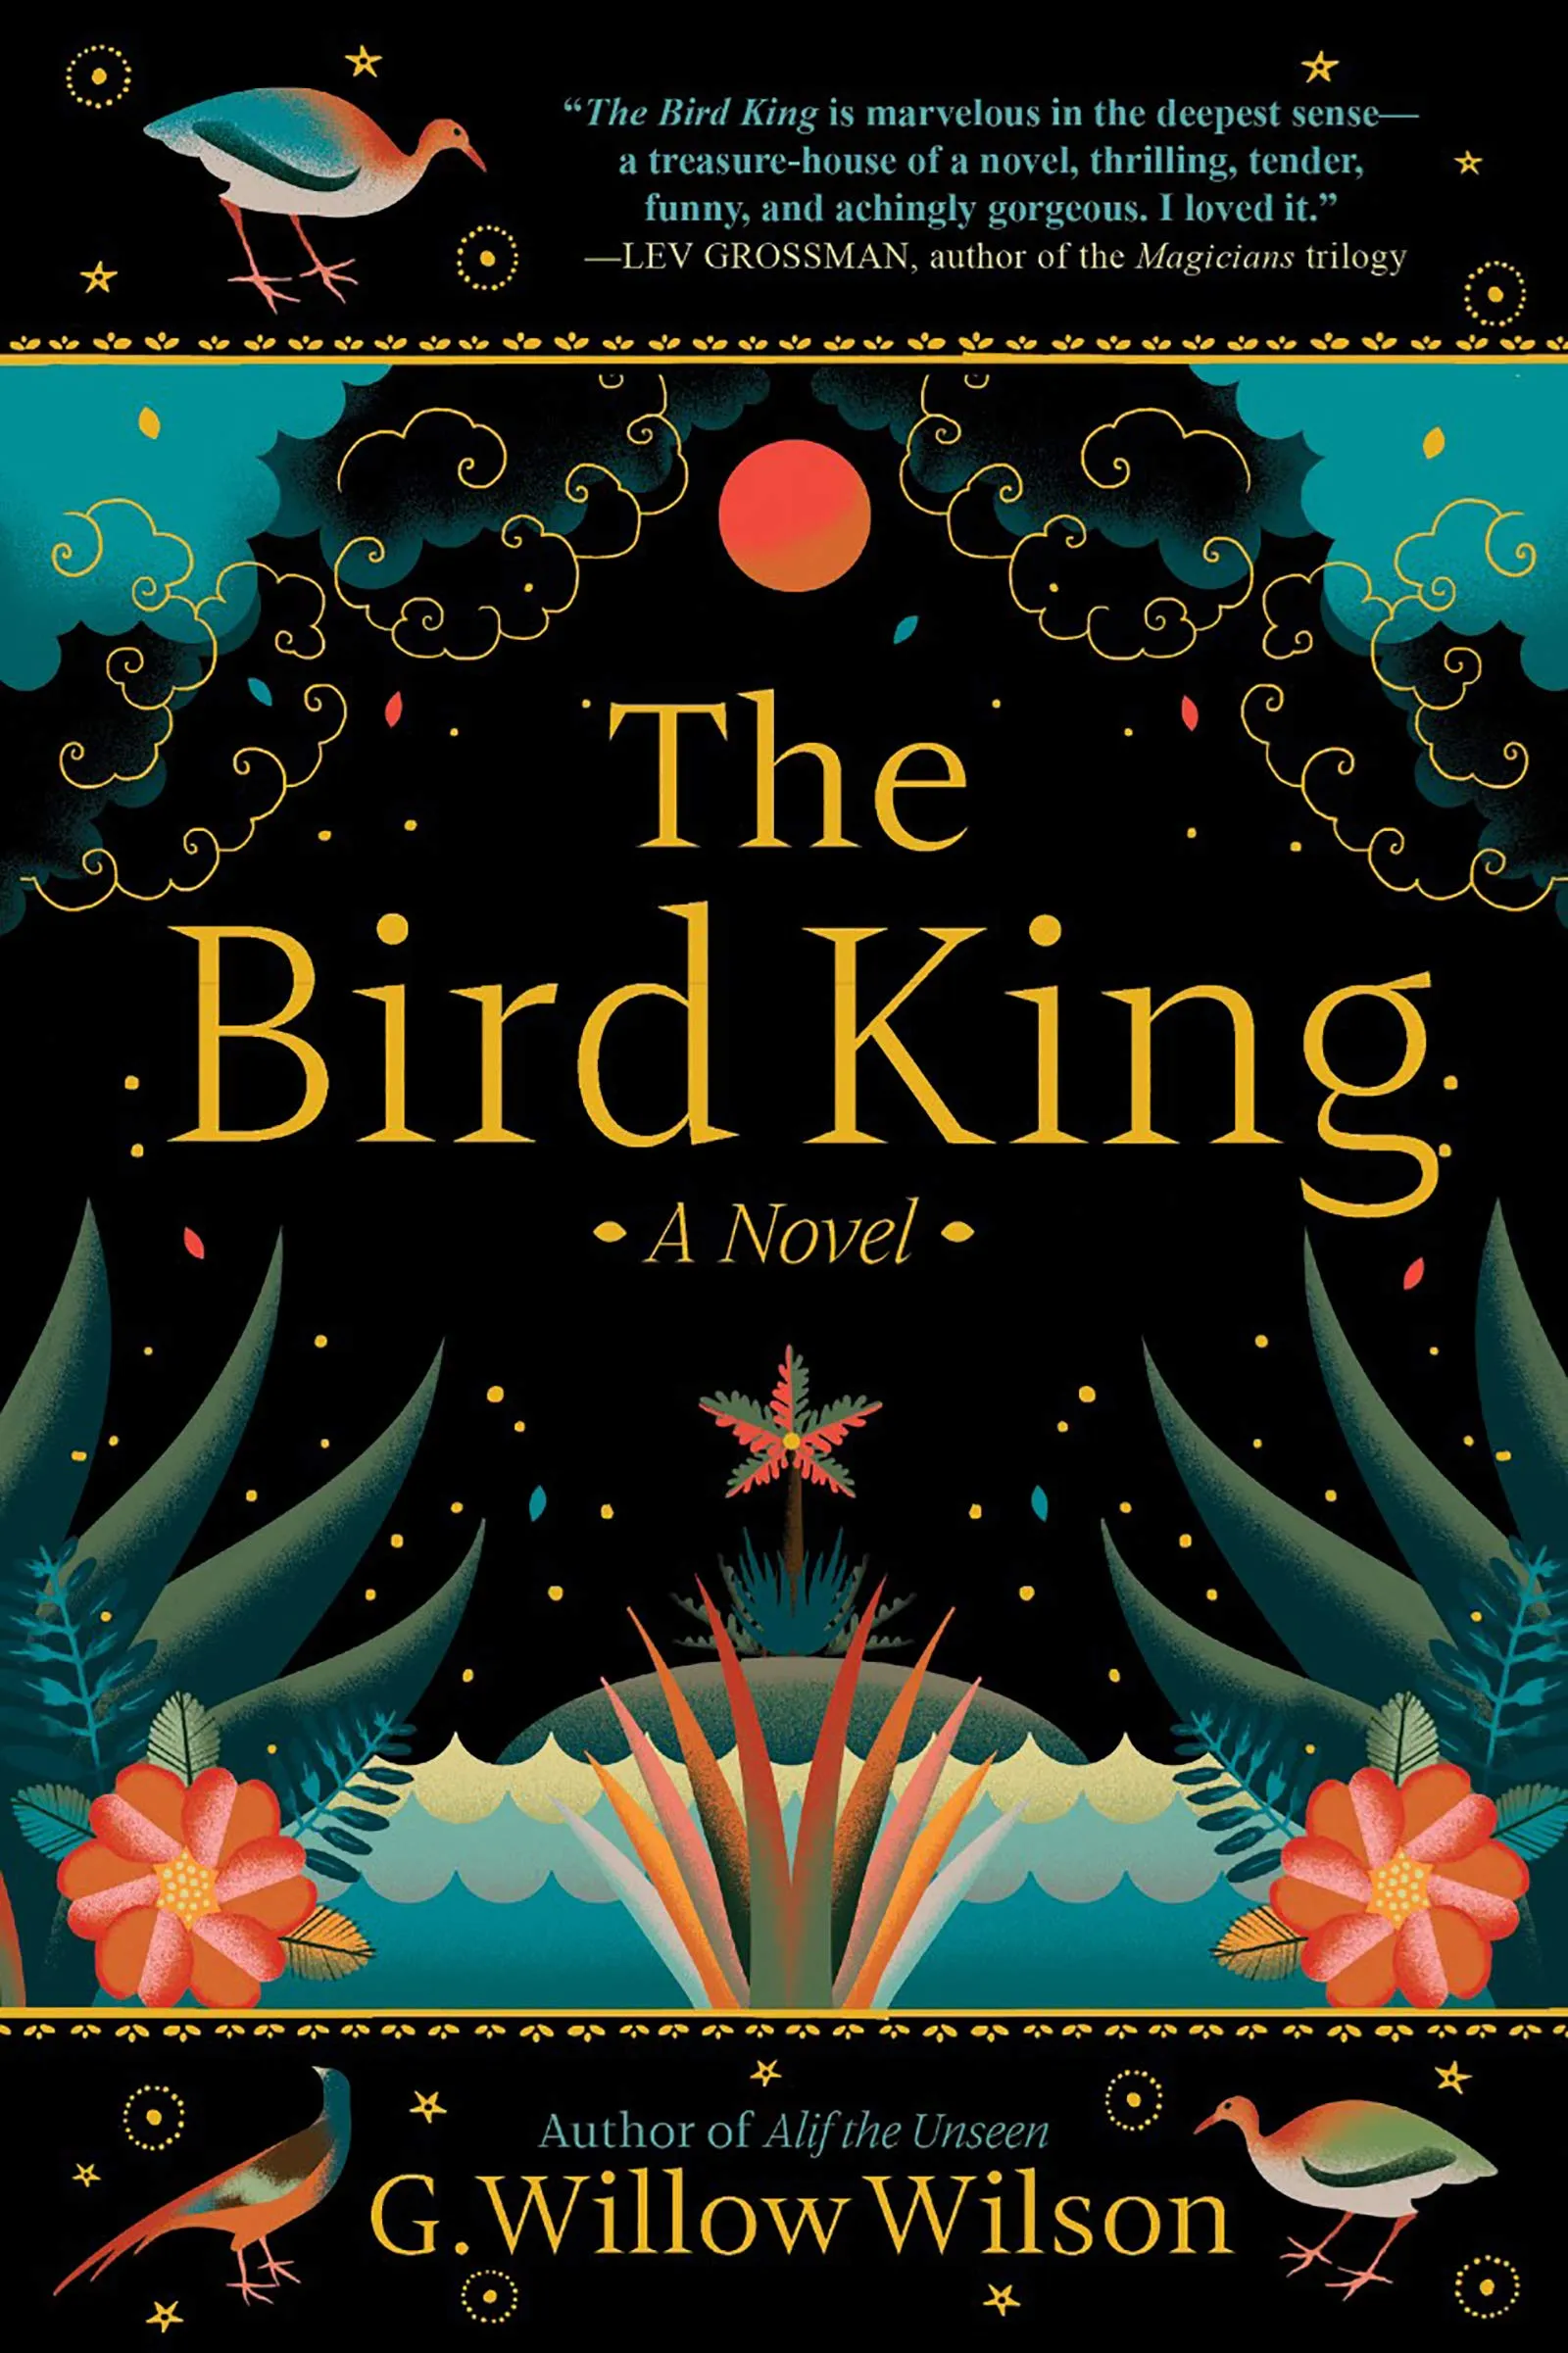 A graphic of the cover of The Bird King by G. Willow Wilson